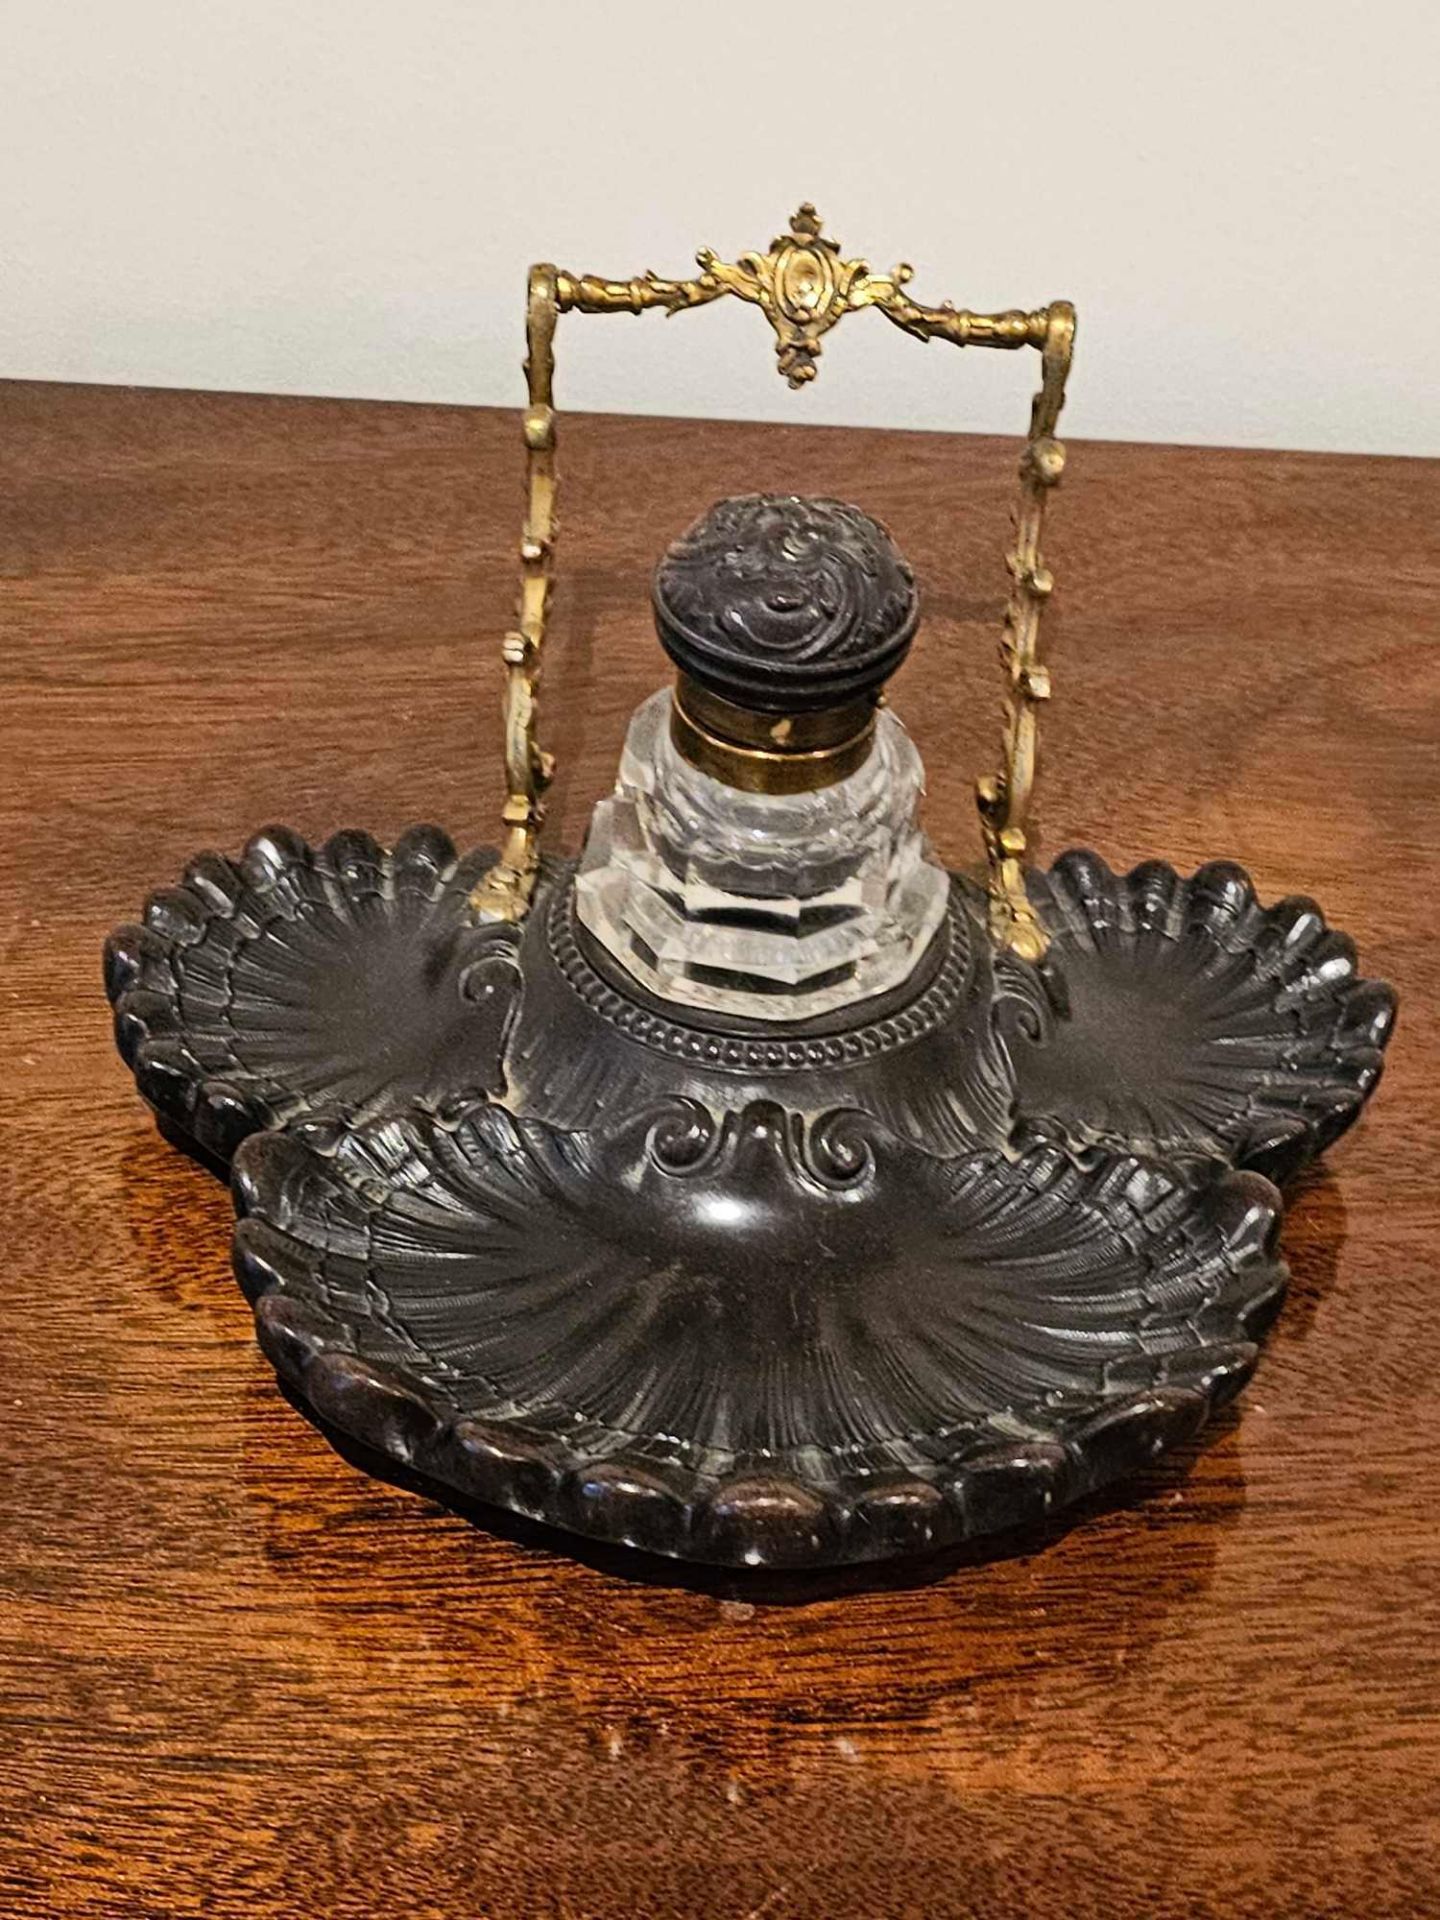 C1860. French Bois Derci Inkwell With Cut Glass Insert And Brass Handle - Image 3 of 4